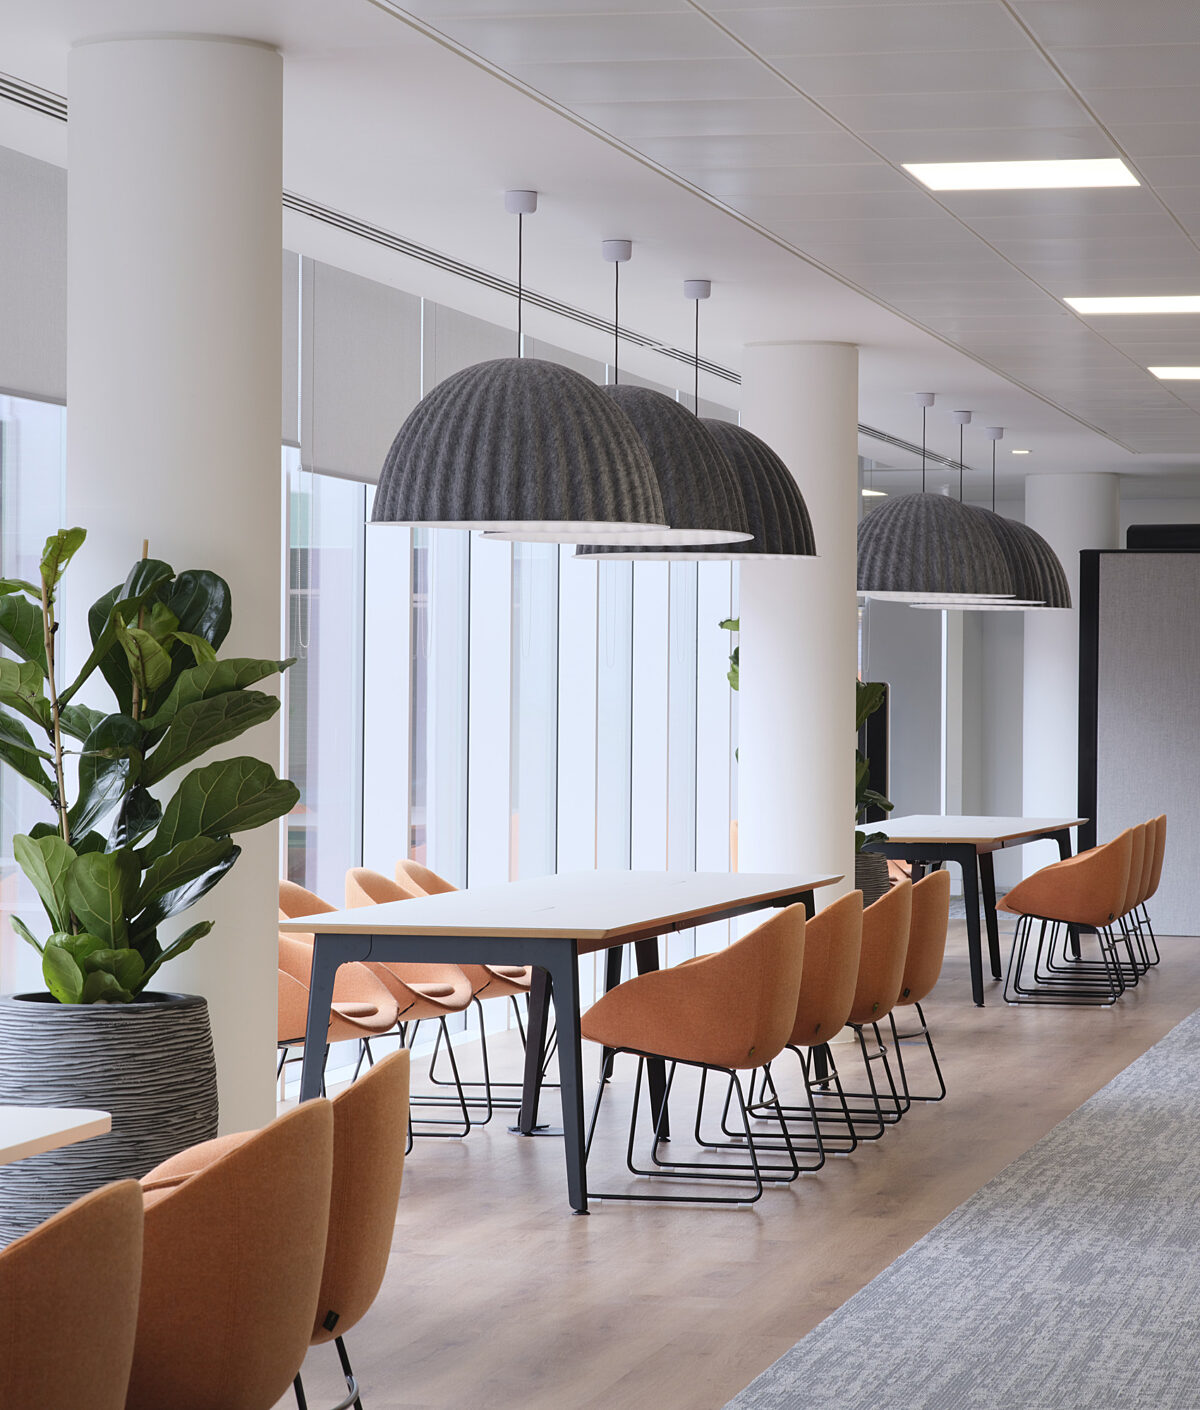 Collaboration spaces in an office, long tables with orange chairs and hanging feature lights